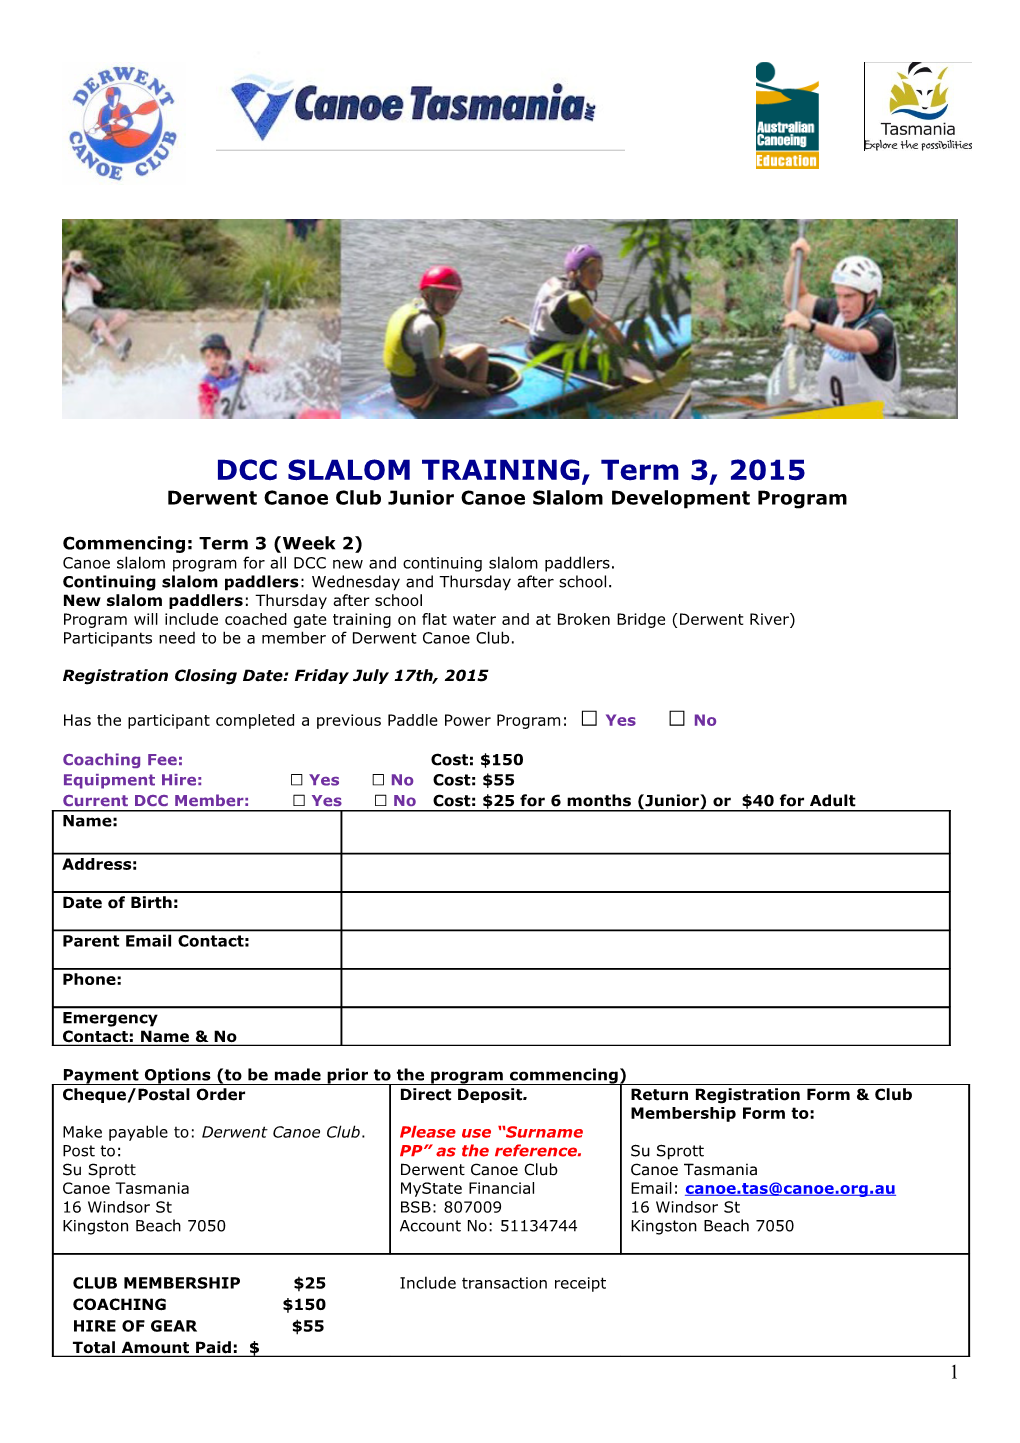 Canoe Slalom Program for All DCC New and Continuing Slalom Paddlers